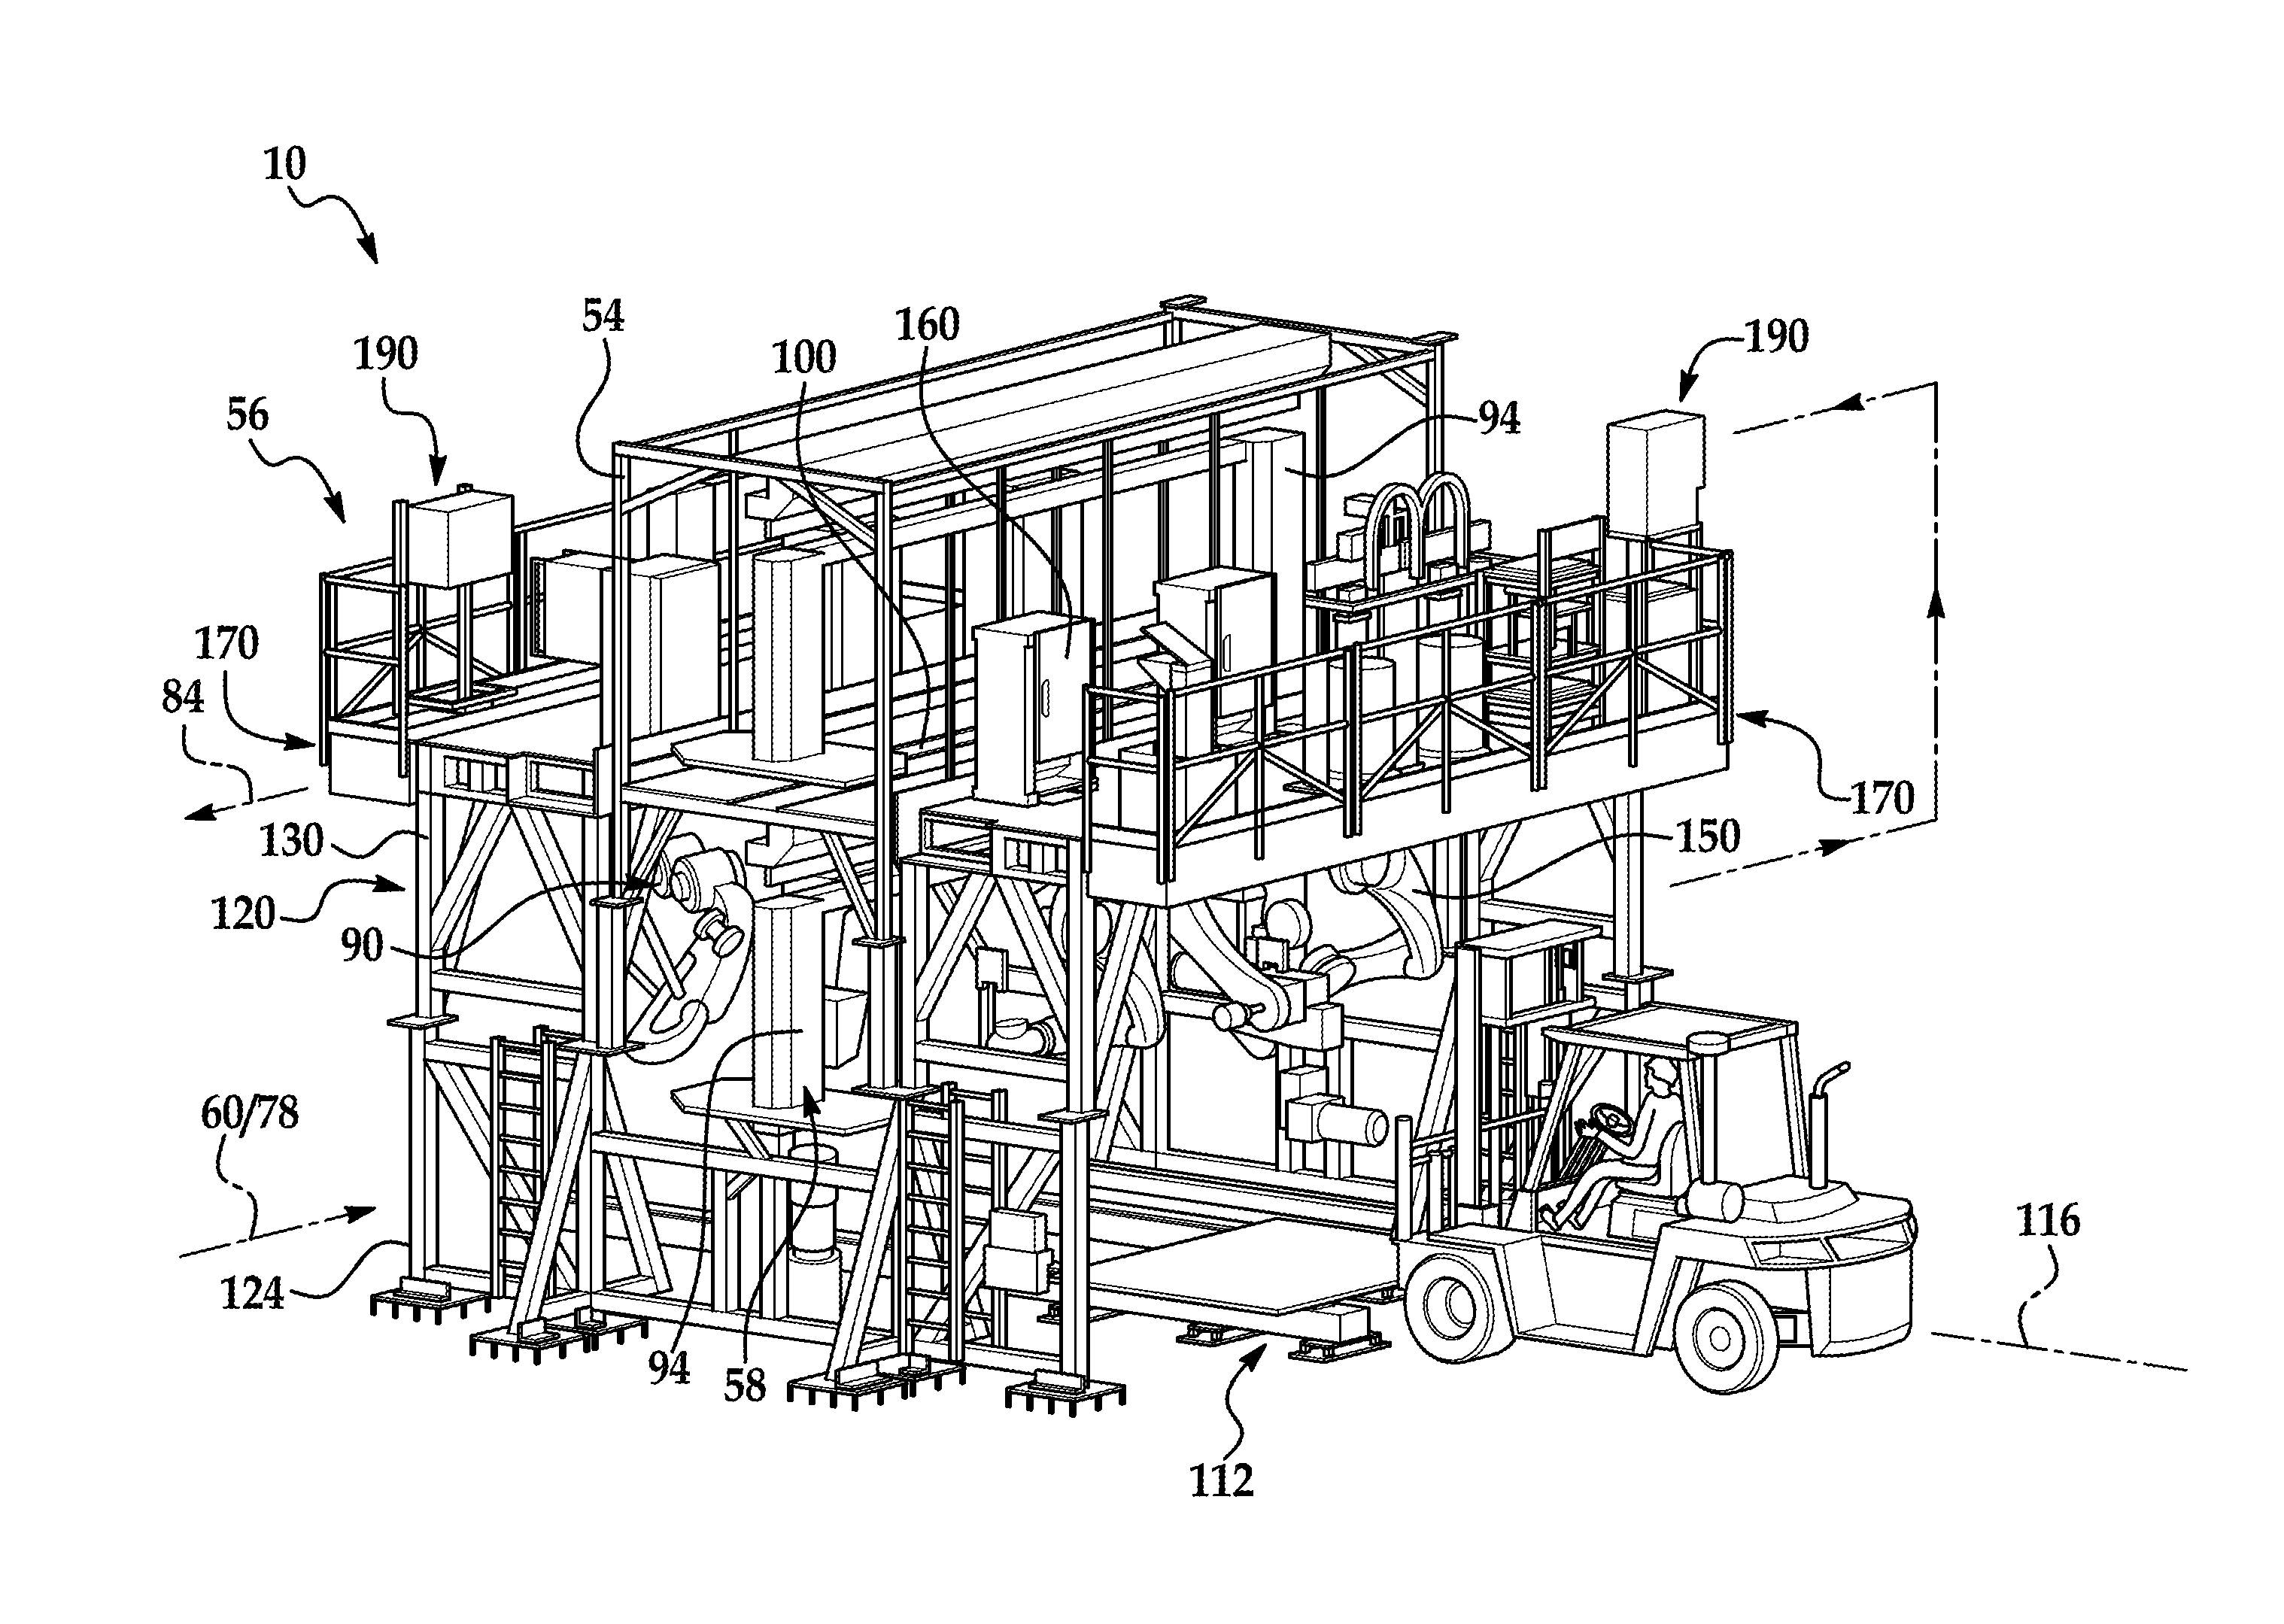 Modular vehicle assembly system and method